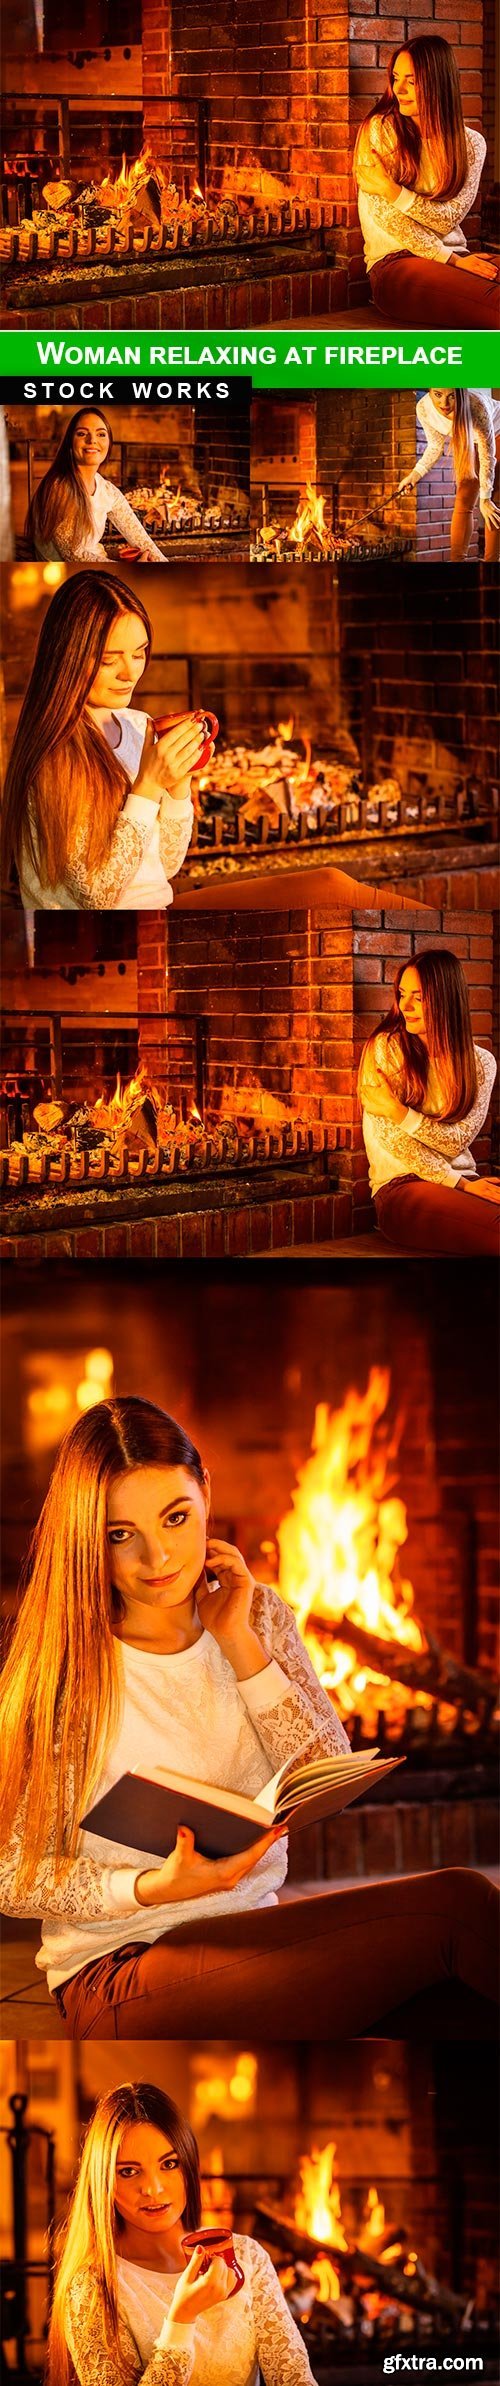 Woman relaxing at fireplace